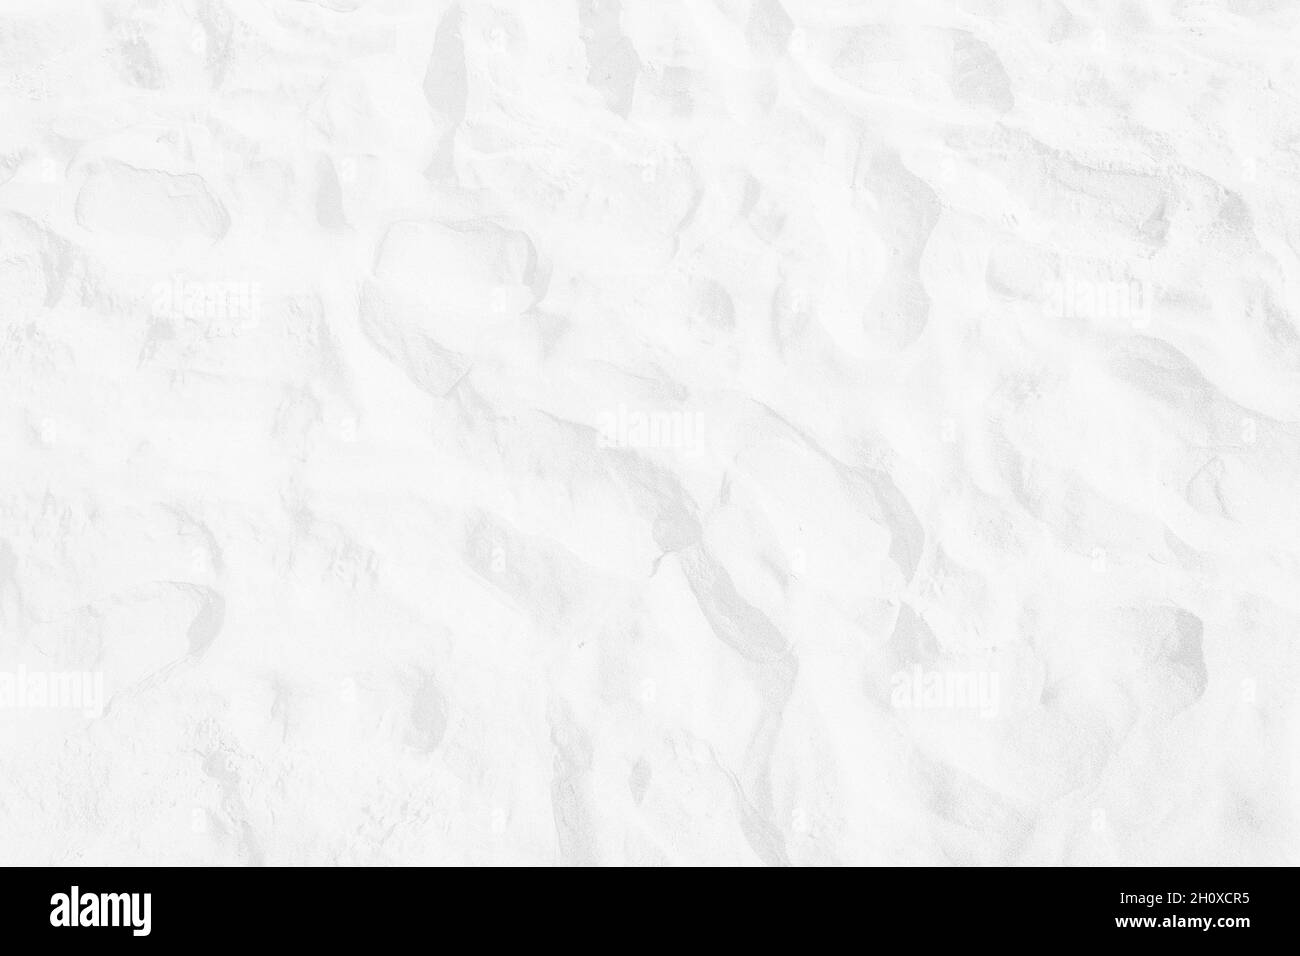 White texture abstract background. Stock Photo